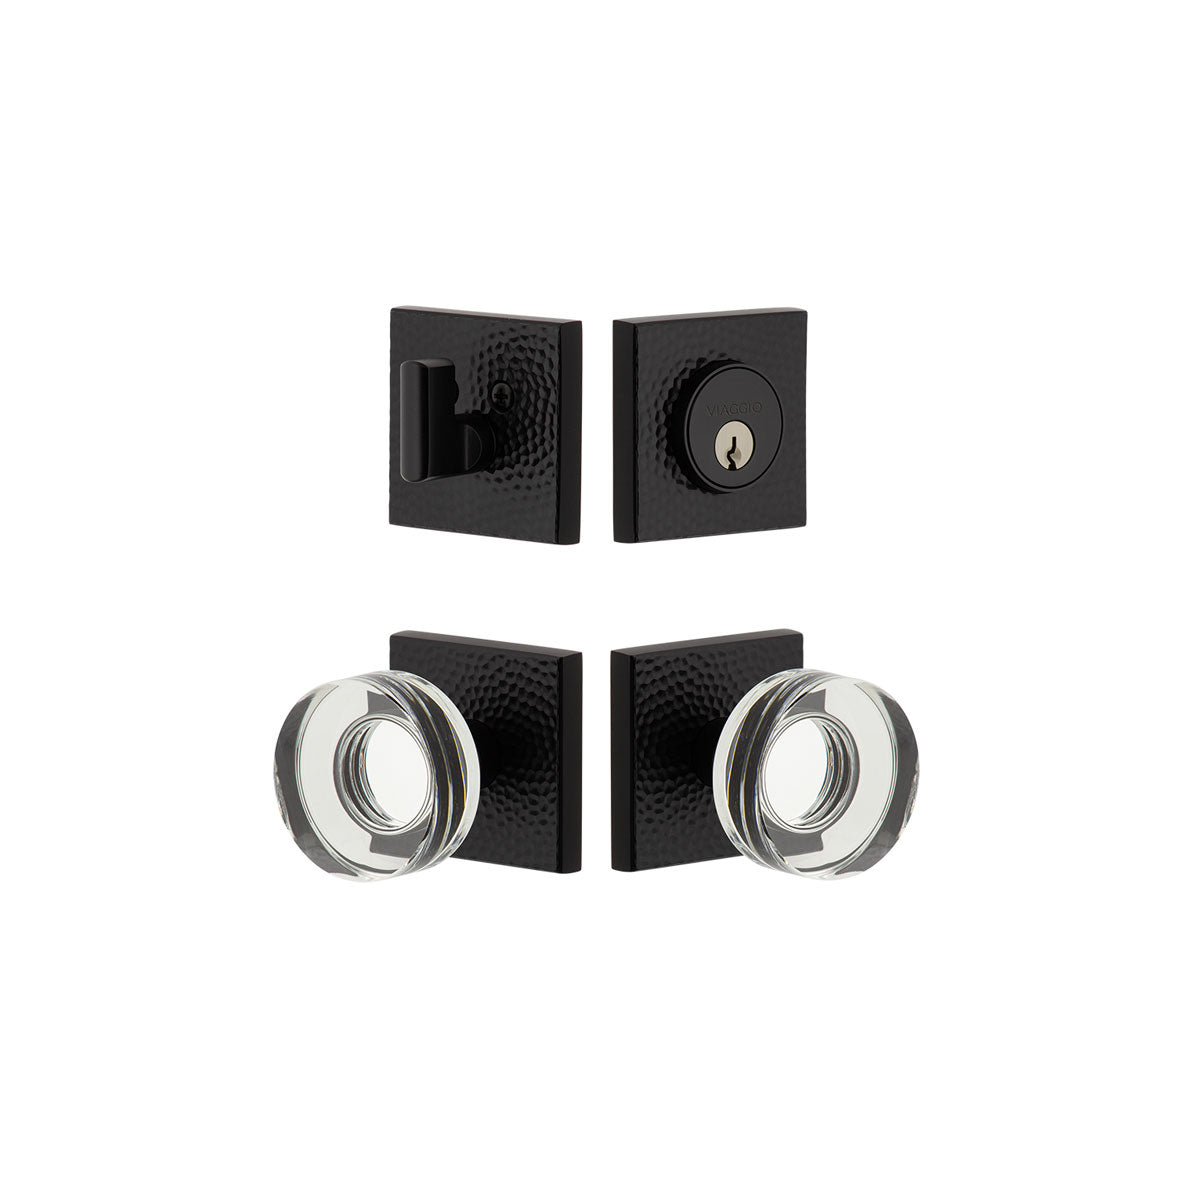 Quadrato Hammered Rosette Entry Set with Circolo Crystal Knob in Satin Black